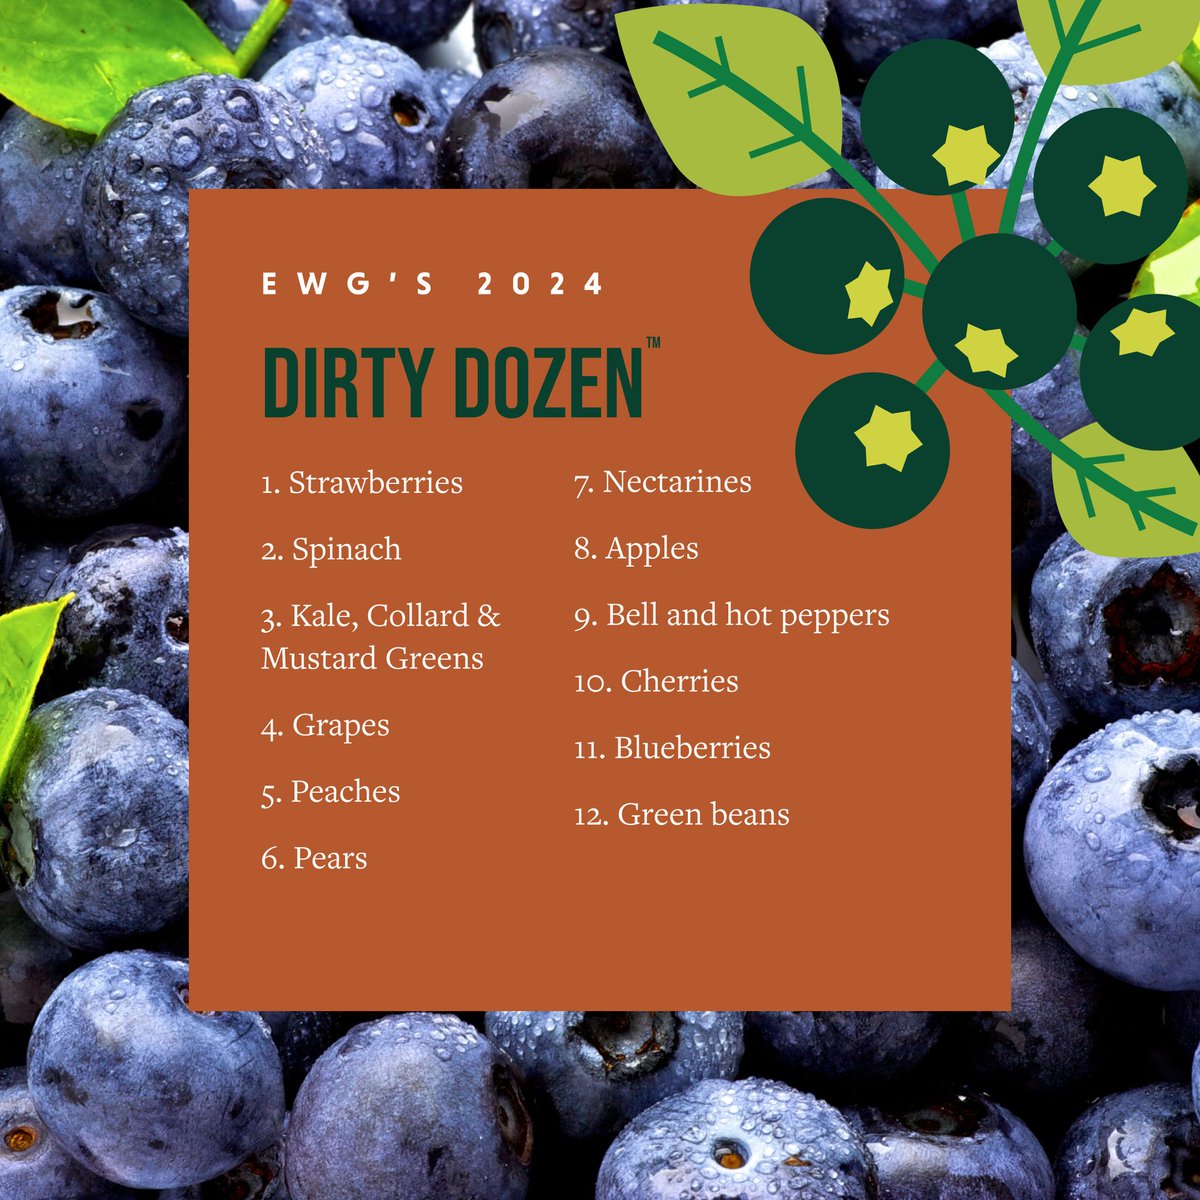 If you think washing & peeling produce removes pesticide residues, think again. Every year the @ewg produces a list of the most pesticide-laden produce. The toxins in non-organic strawberries are so great that they outweigh any nutritional benefit. #eatorganic